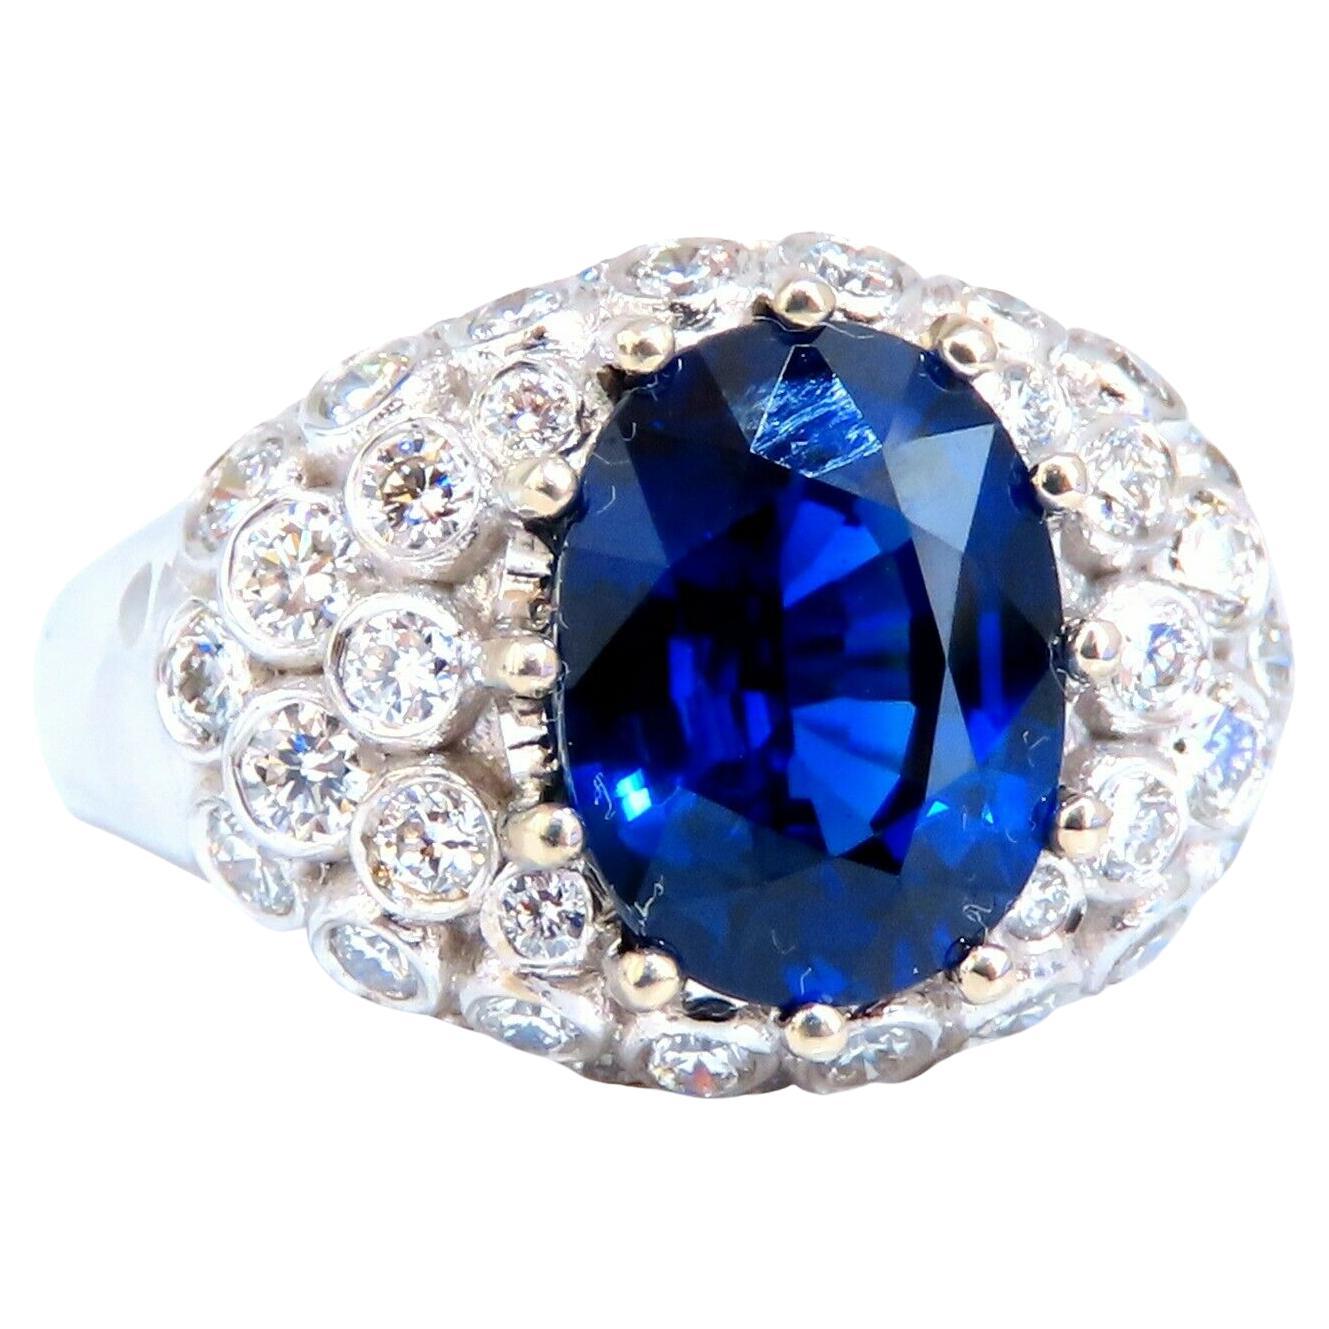 GRS Certified 4.05ct Natural No Heat Vivid Deep Blue Sapphire Diamonds Ring 14kt For Sale